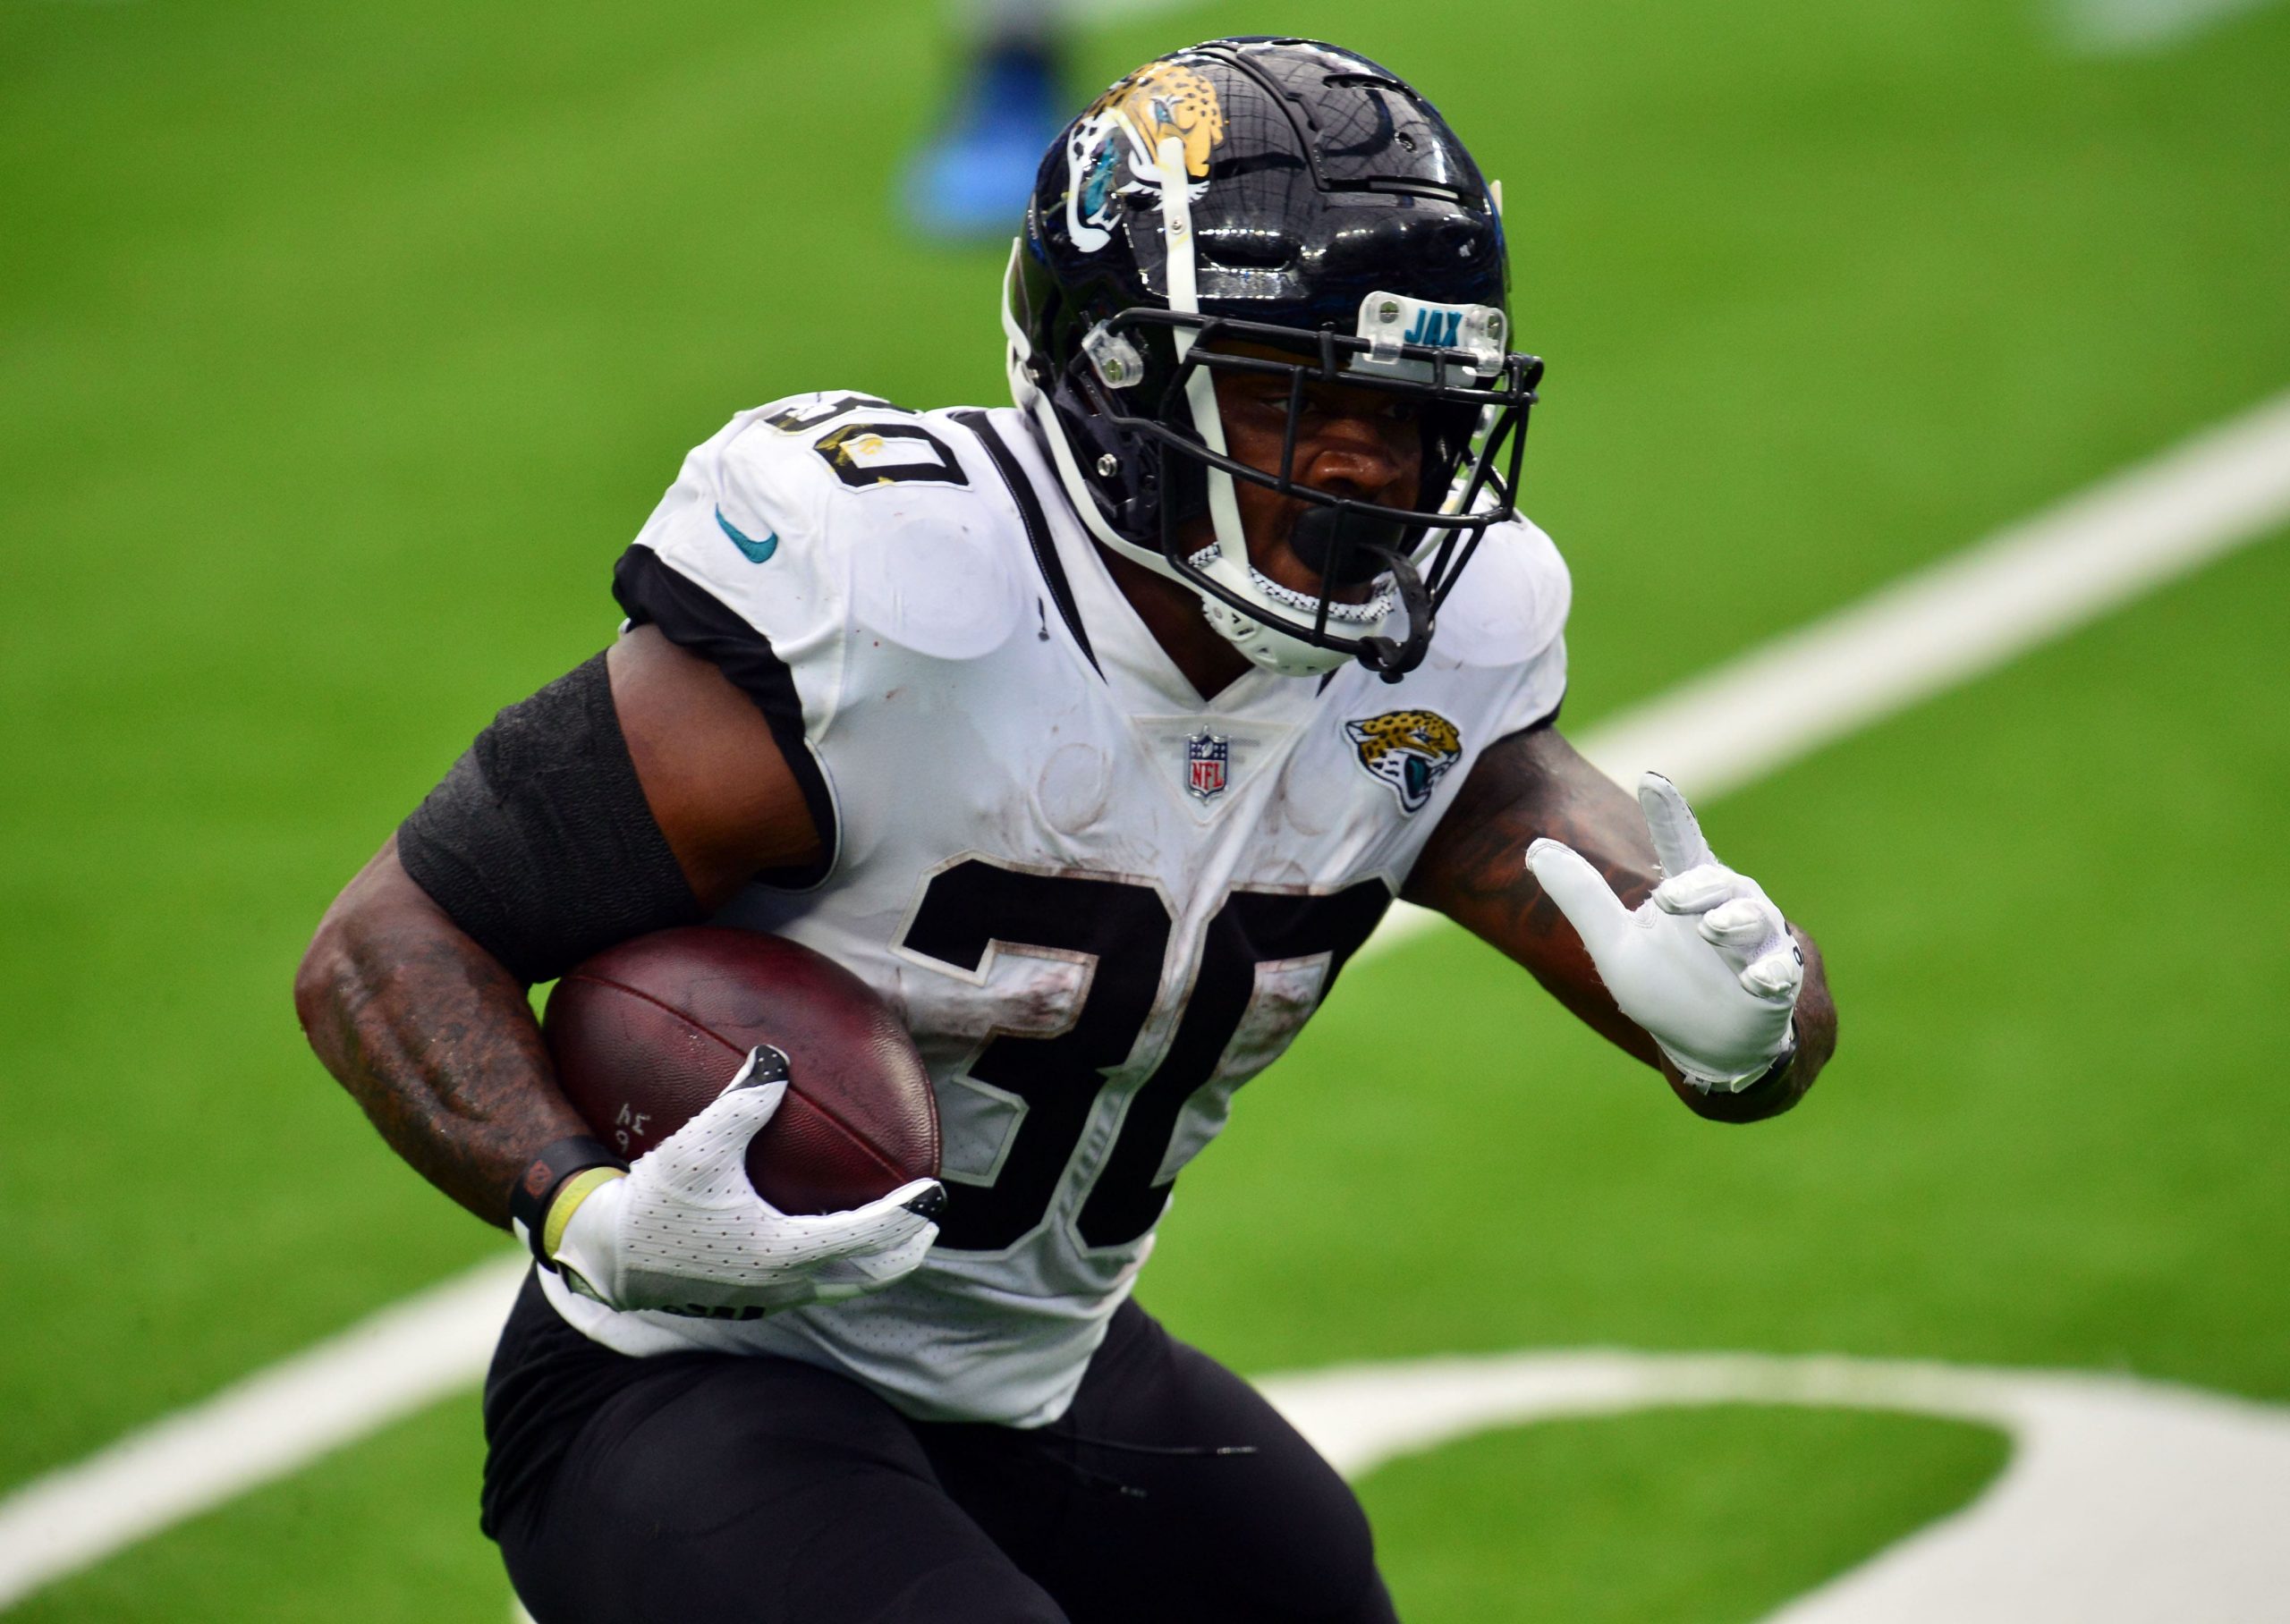 Jacksonville Jaguars running back James Robinson (30) runs the ball against the Los Angeles Chargers during the first half at SoFi Stadium.